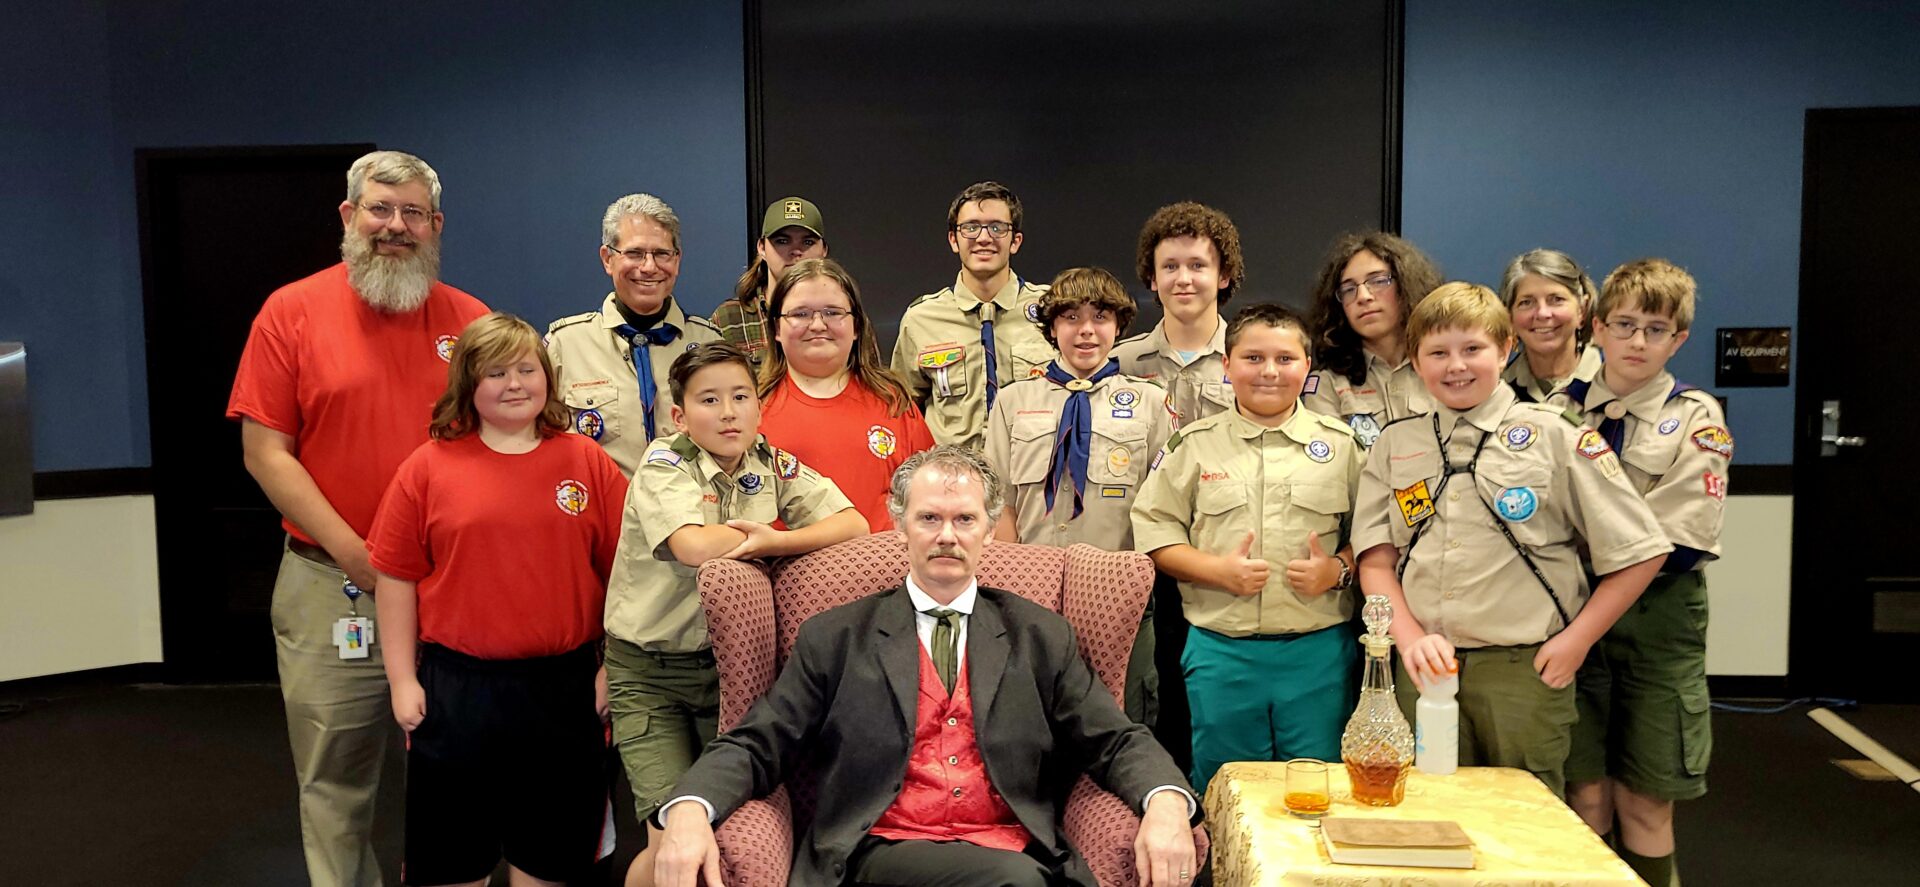 Troop 103 and the Edgar Allan Poe Impersonator, Todd Loughry